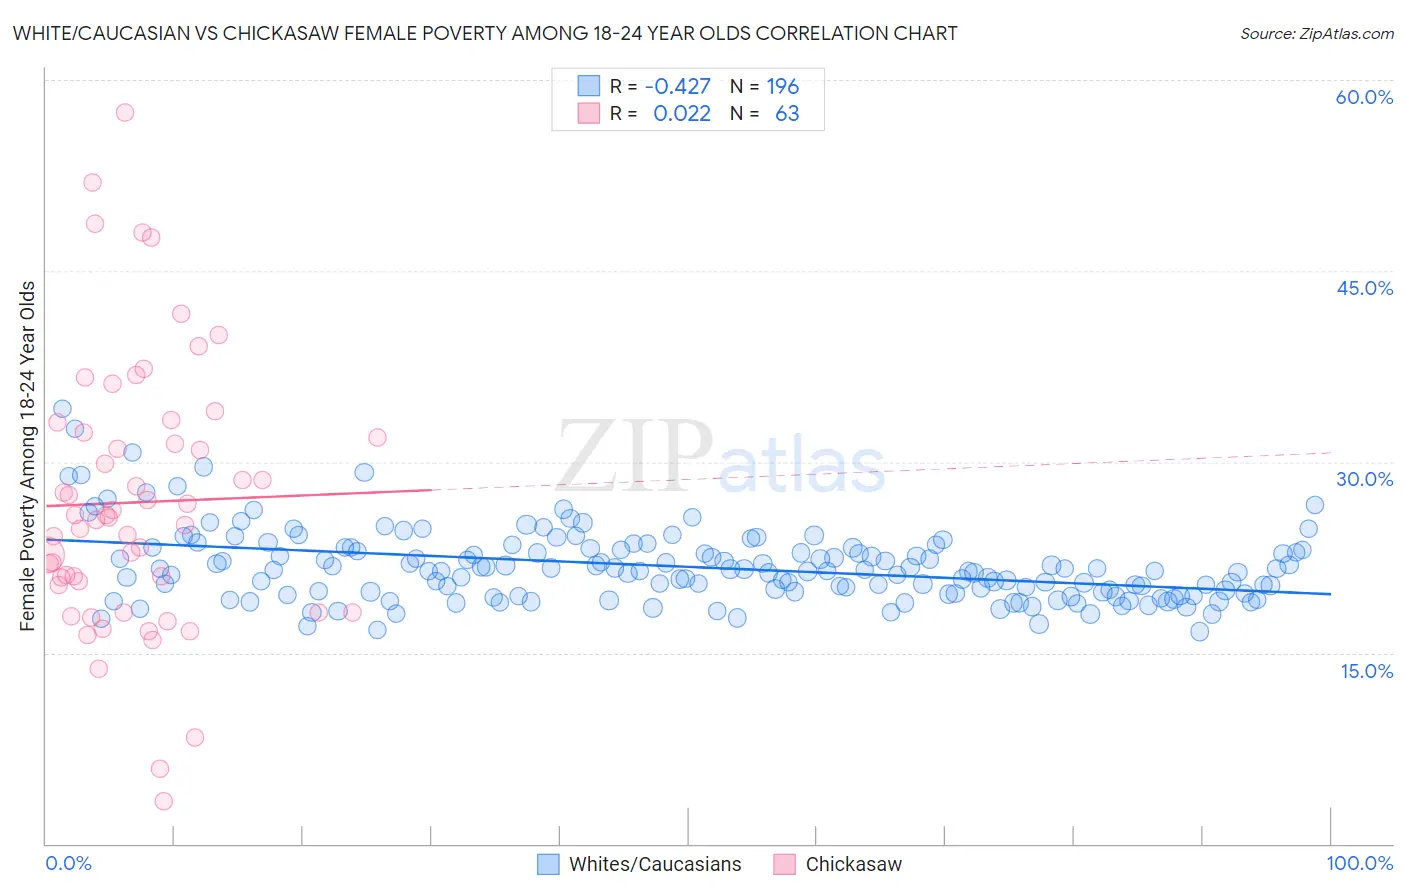 White/Caucasian vs Chickasaw Female Poverty Among 18-24 Year Olds